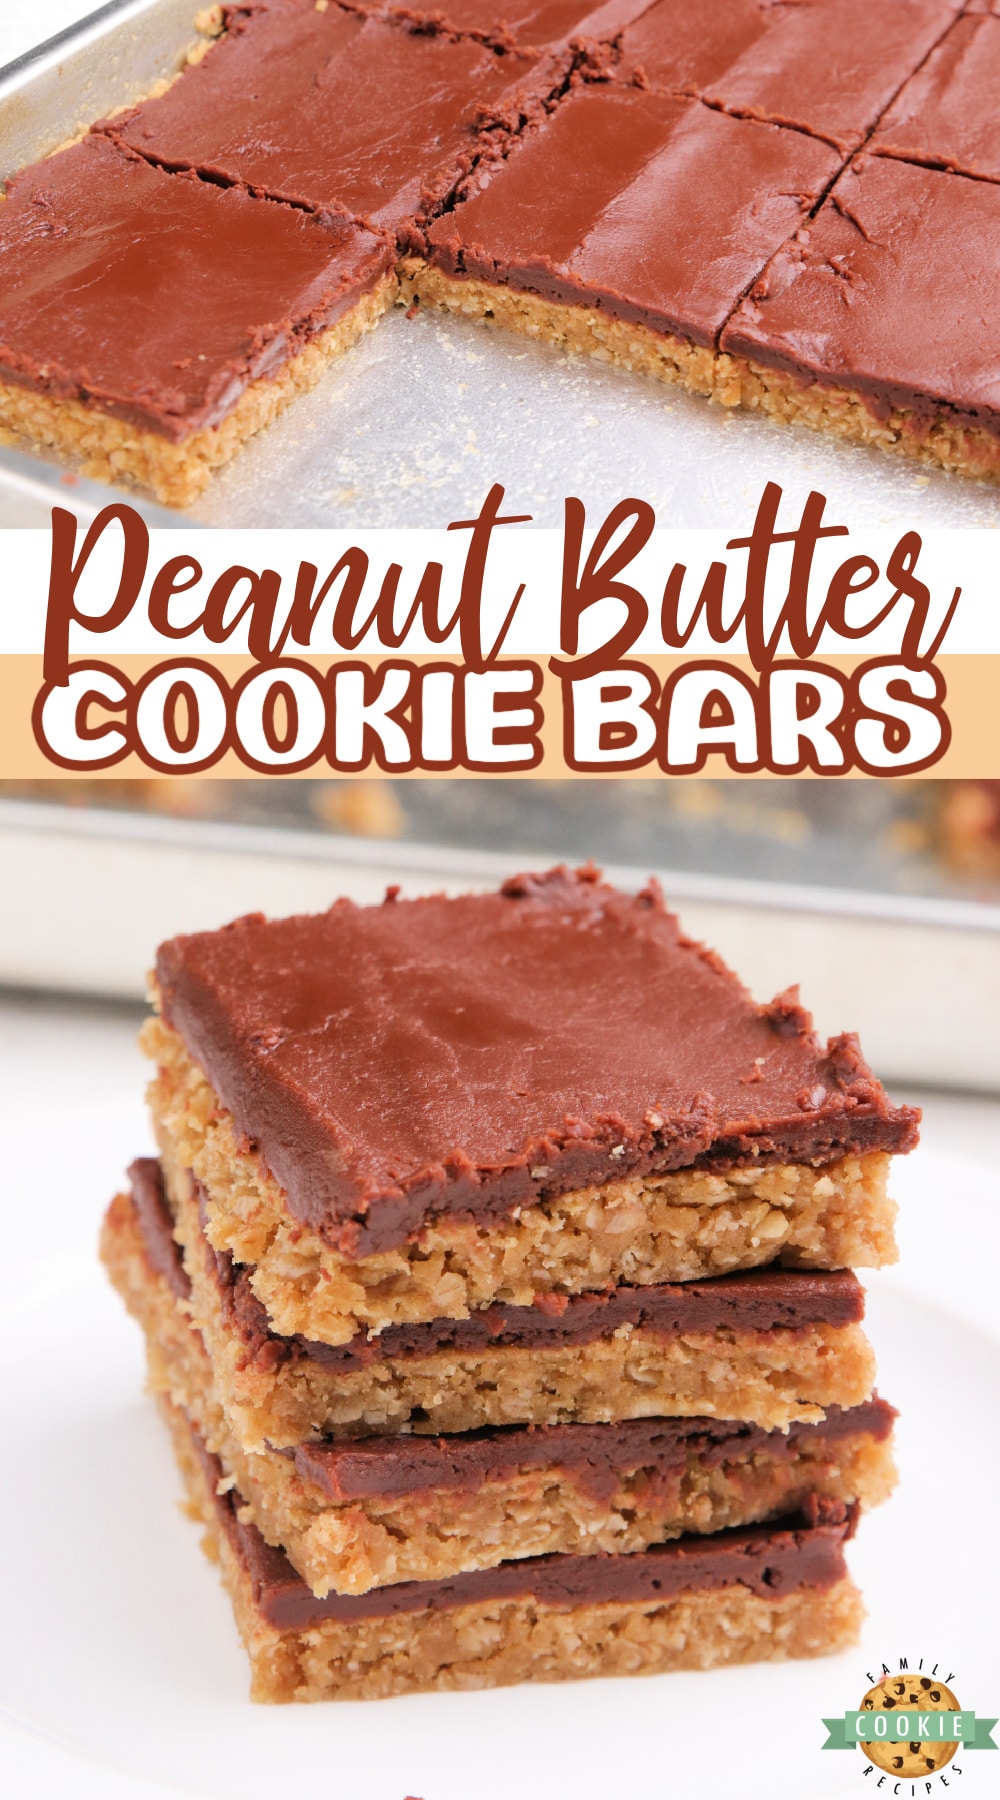 Peanut Butter Cookie Bars are soft and chewy with a chocolate fudge frosting on top. Delicious cookie bar recipe made with peanut butter, oats and a simple chocolate ganache for the frosting!